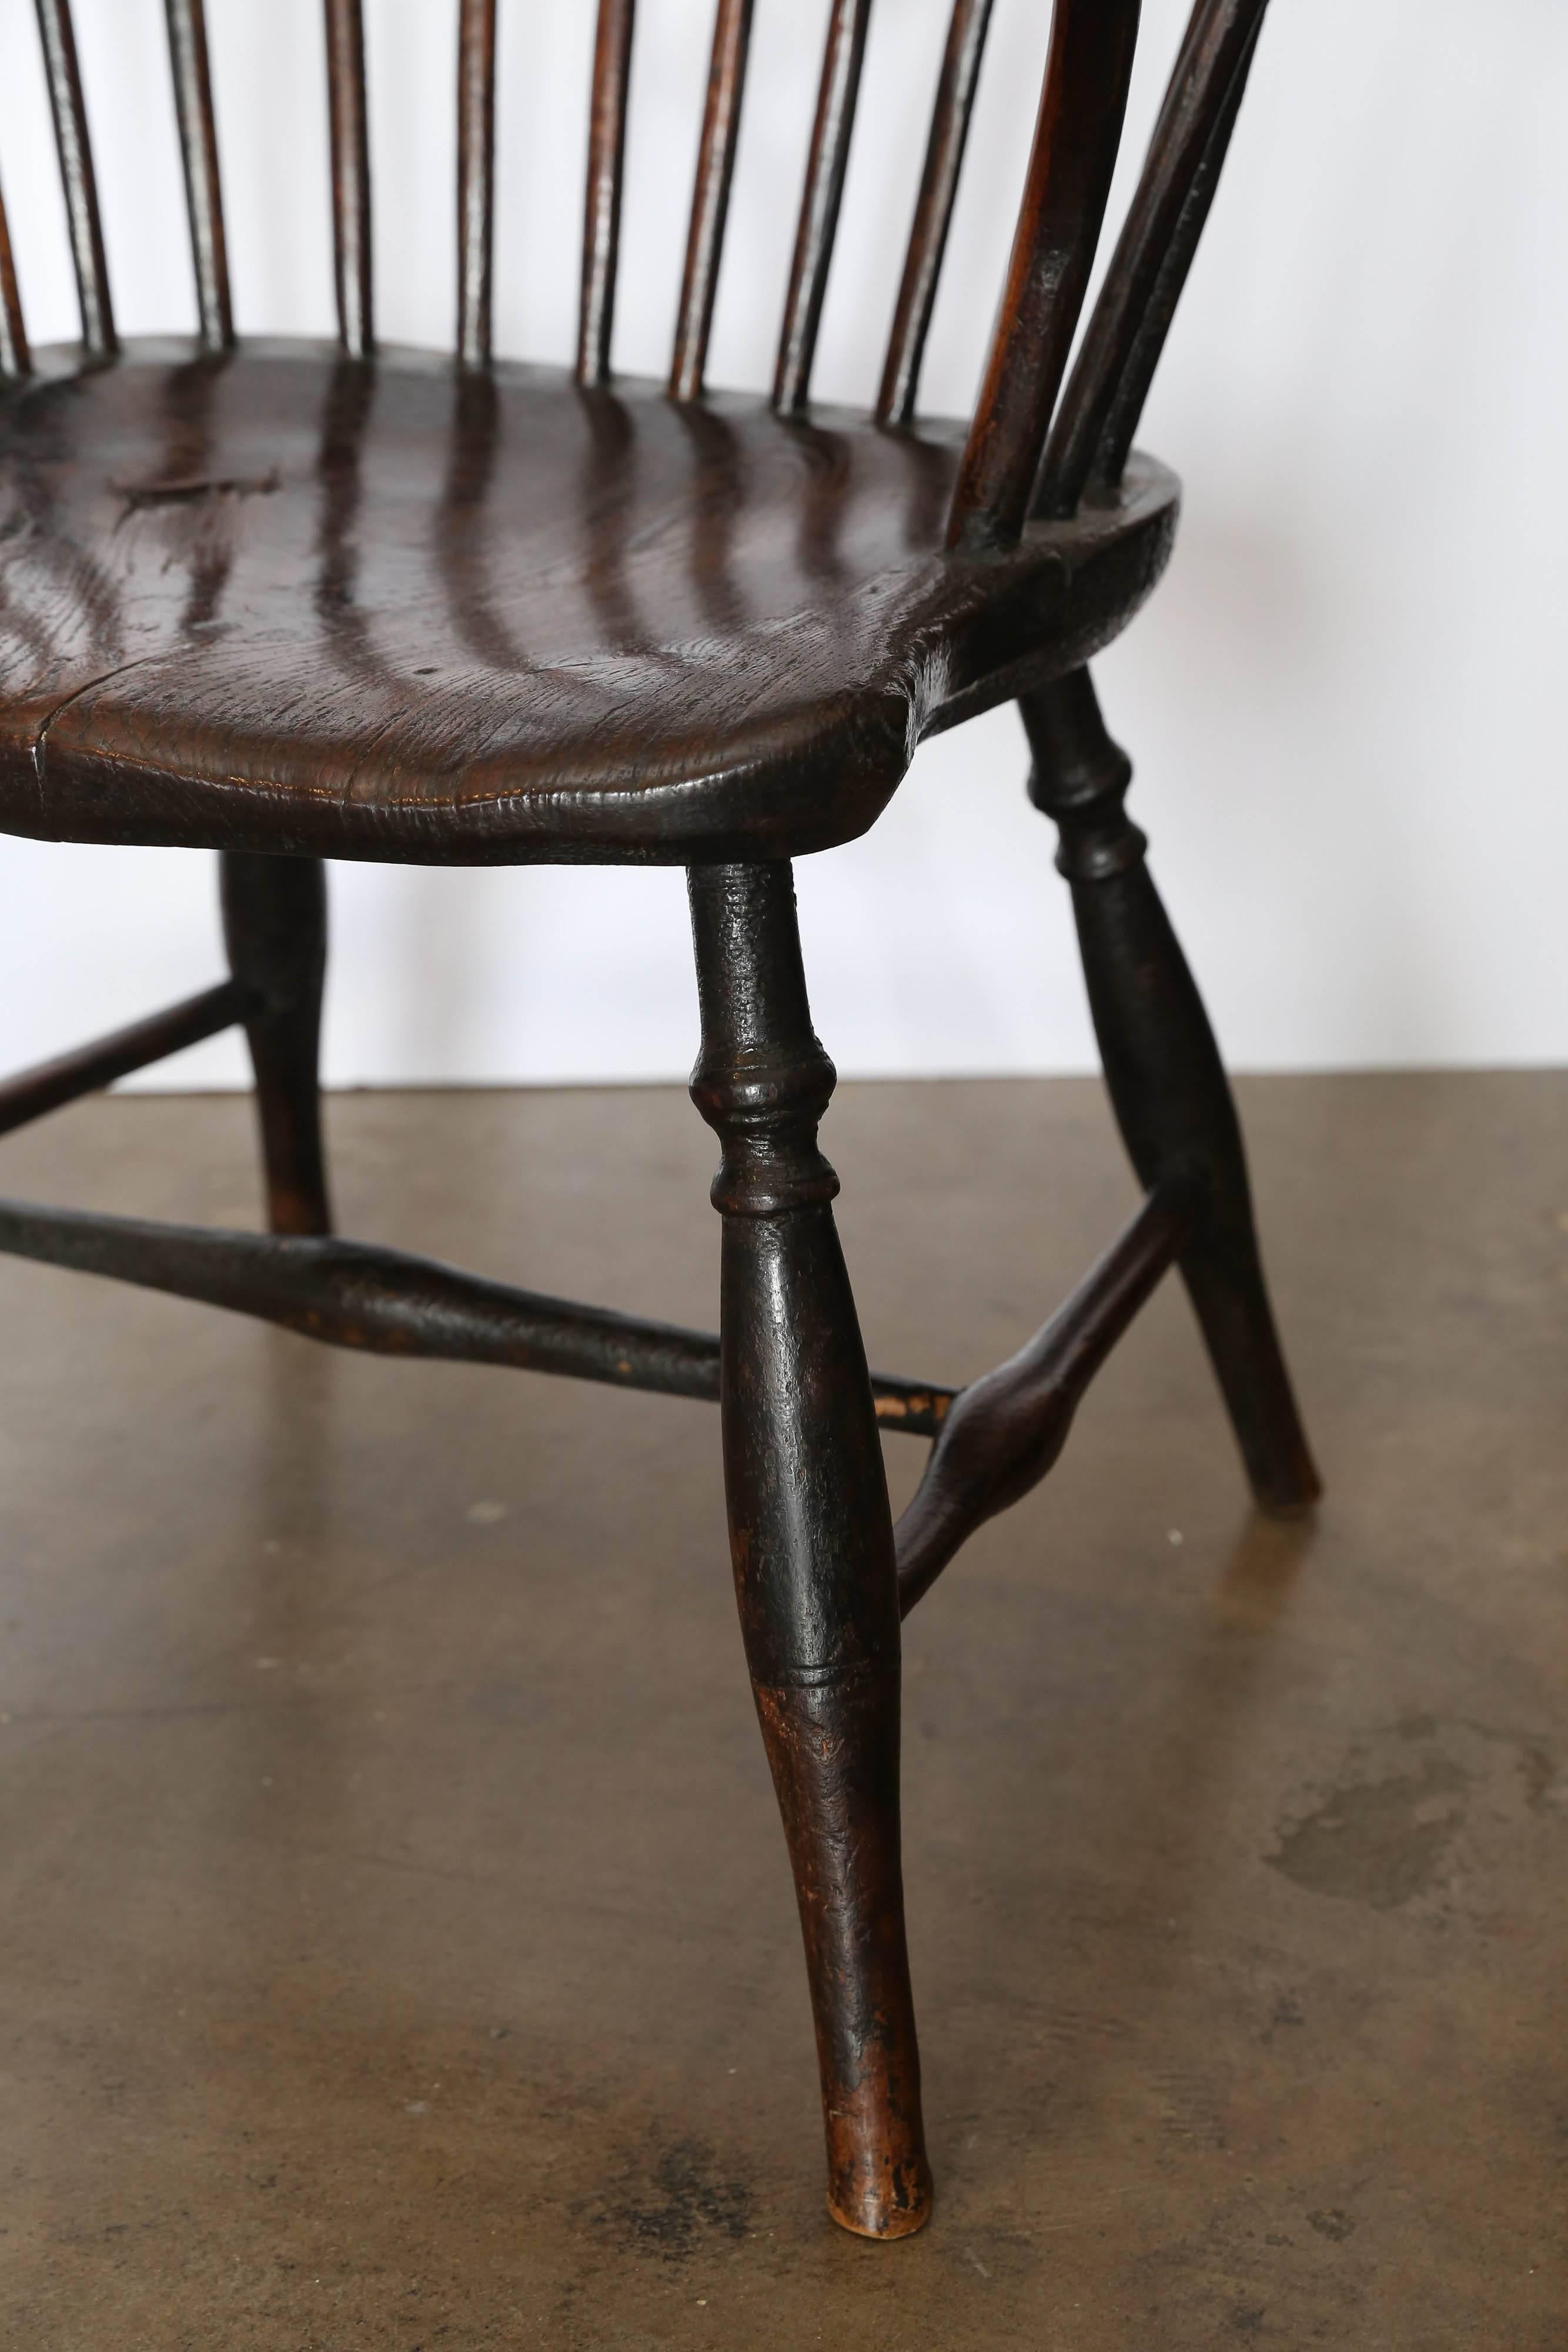 19th century windsor chair, circa 1840. Beautifully worn seat and arms.